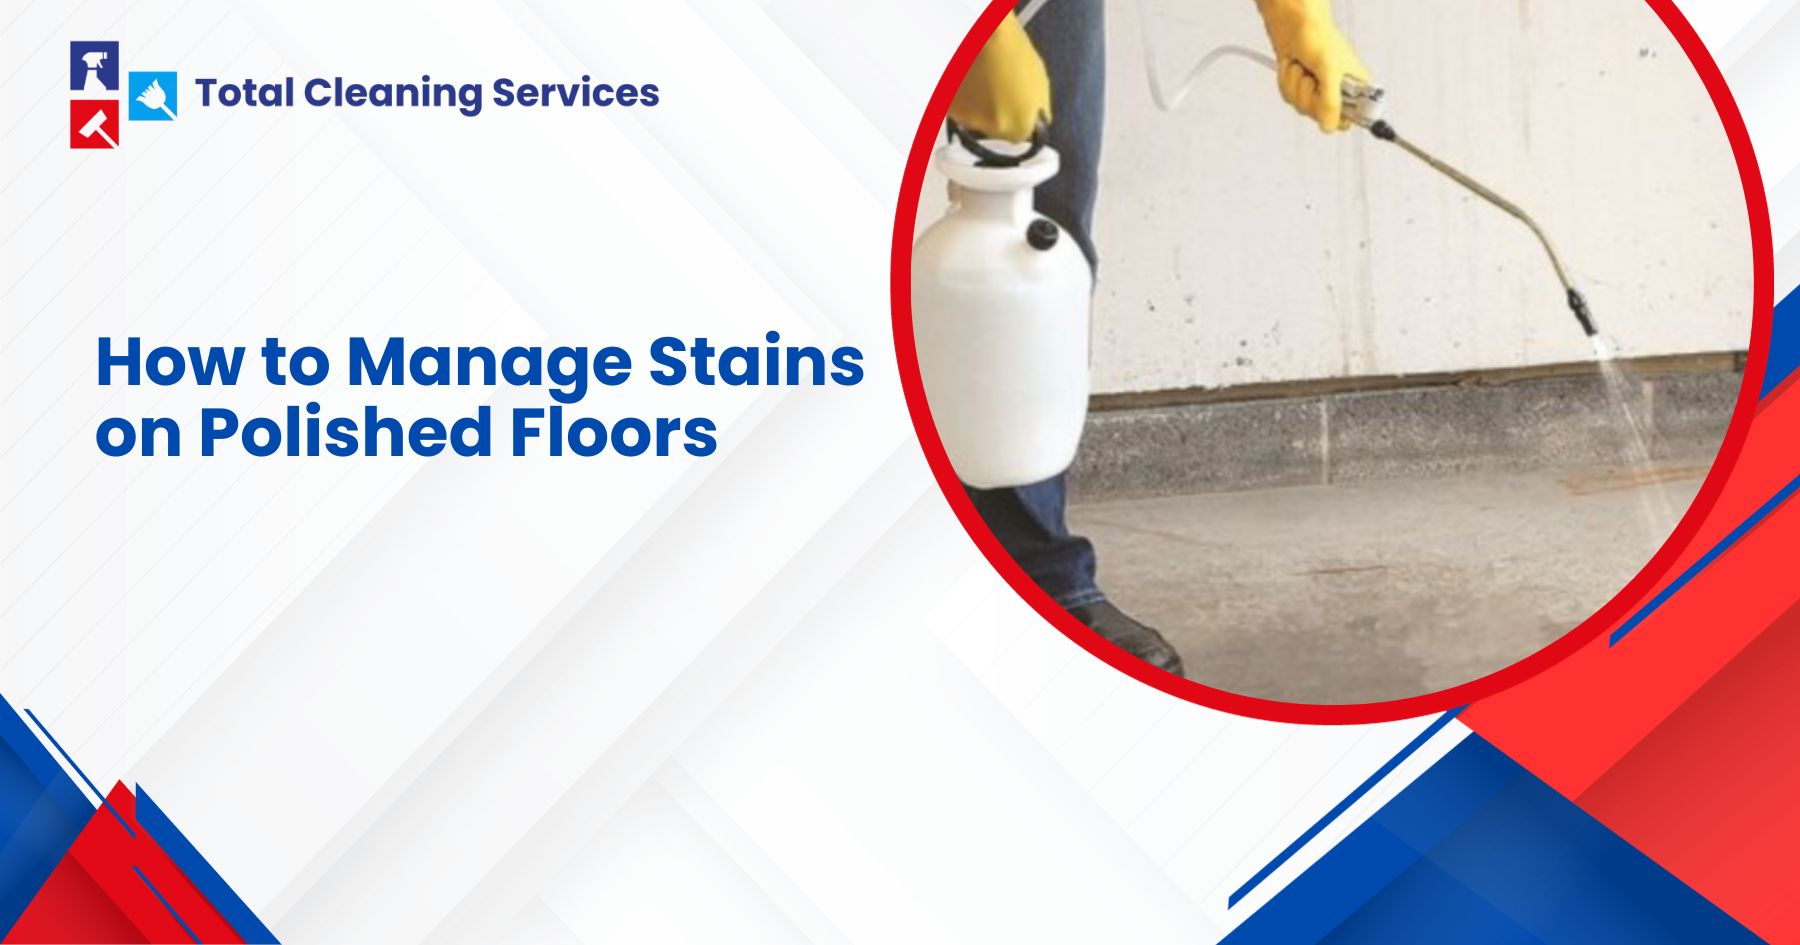 How to Manage Stains on Polished Floors